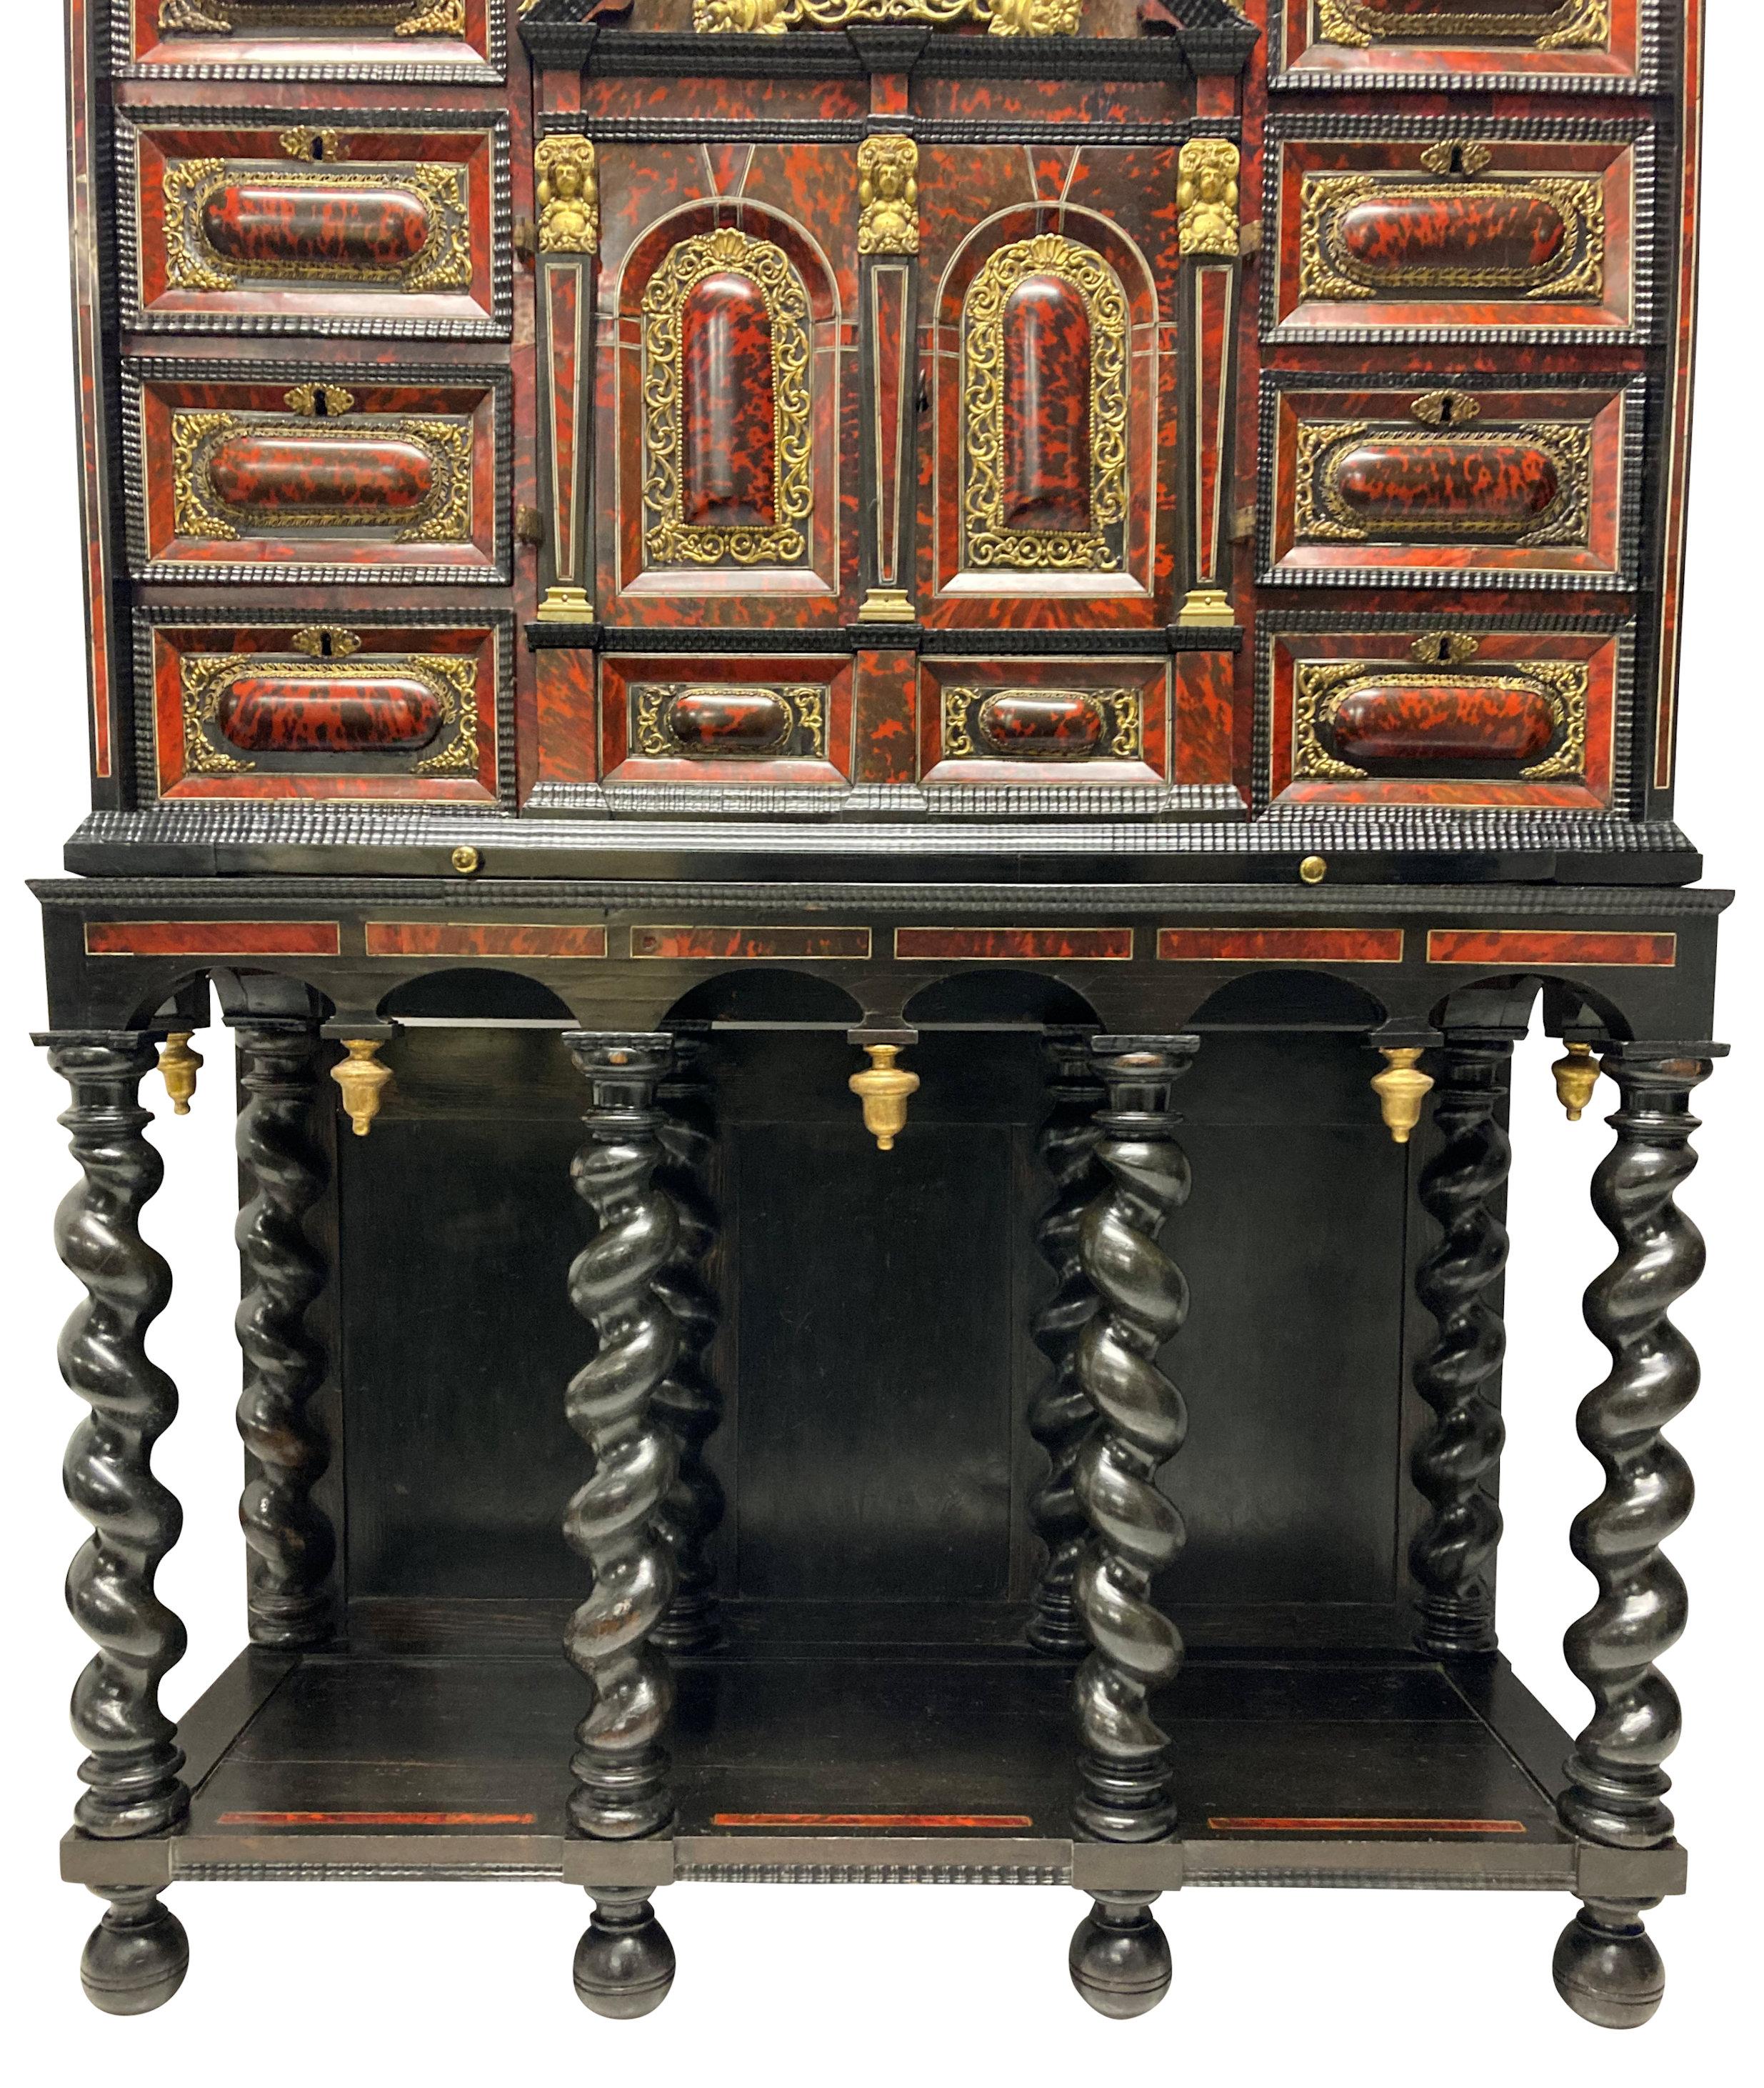 Fine Flemish Baroque Late 17th Century Tortoiseshell Cabinet on Stand For Sale 1